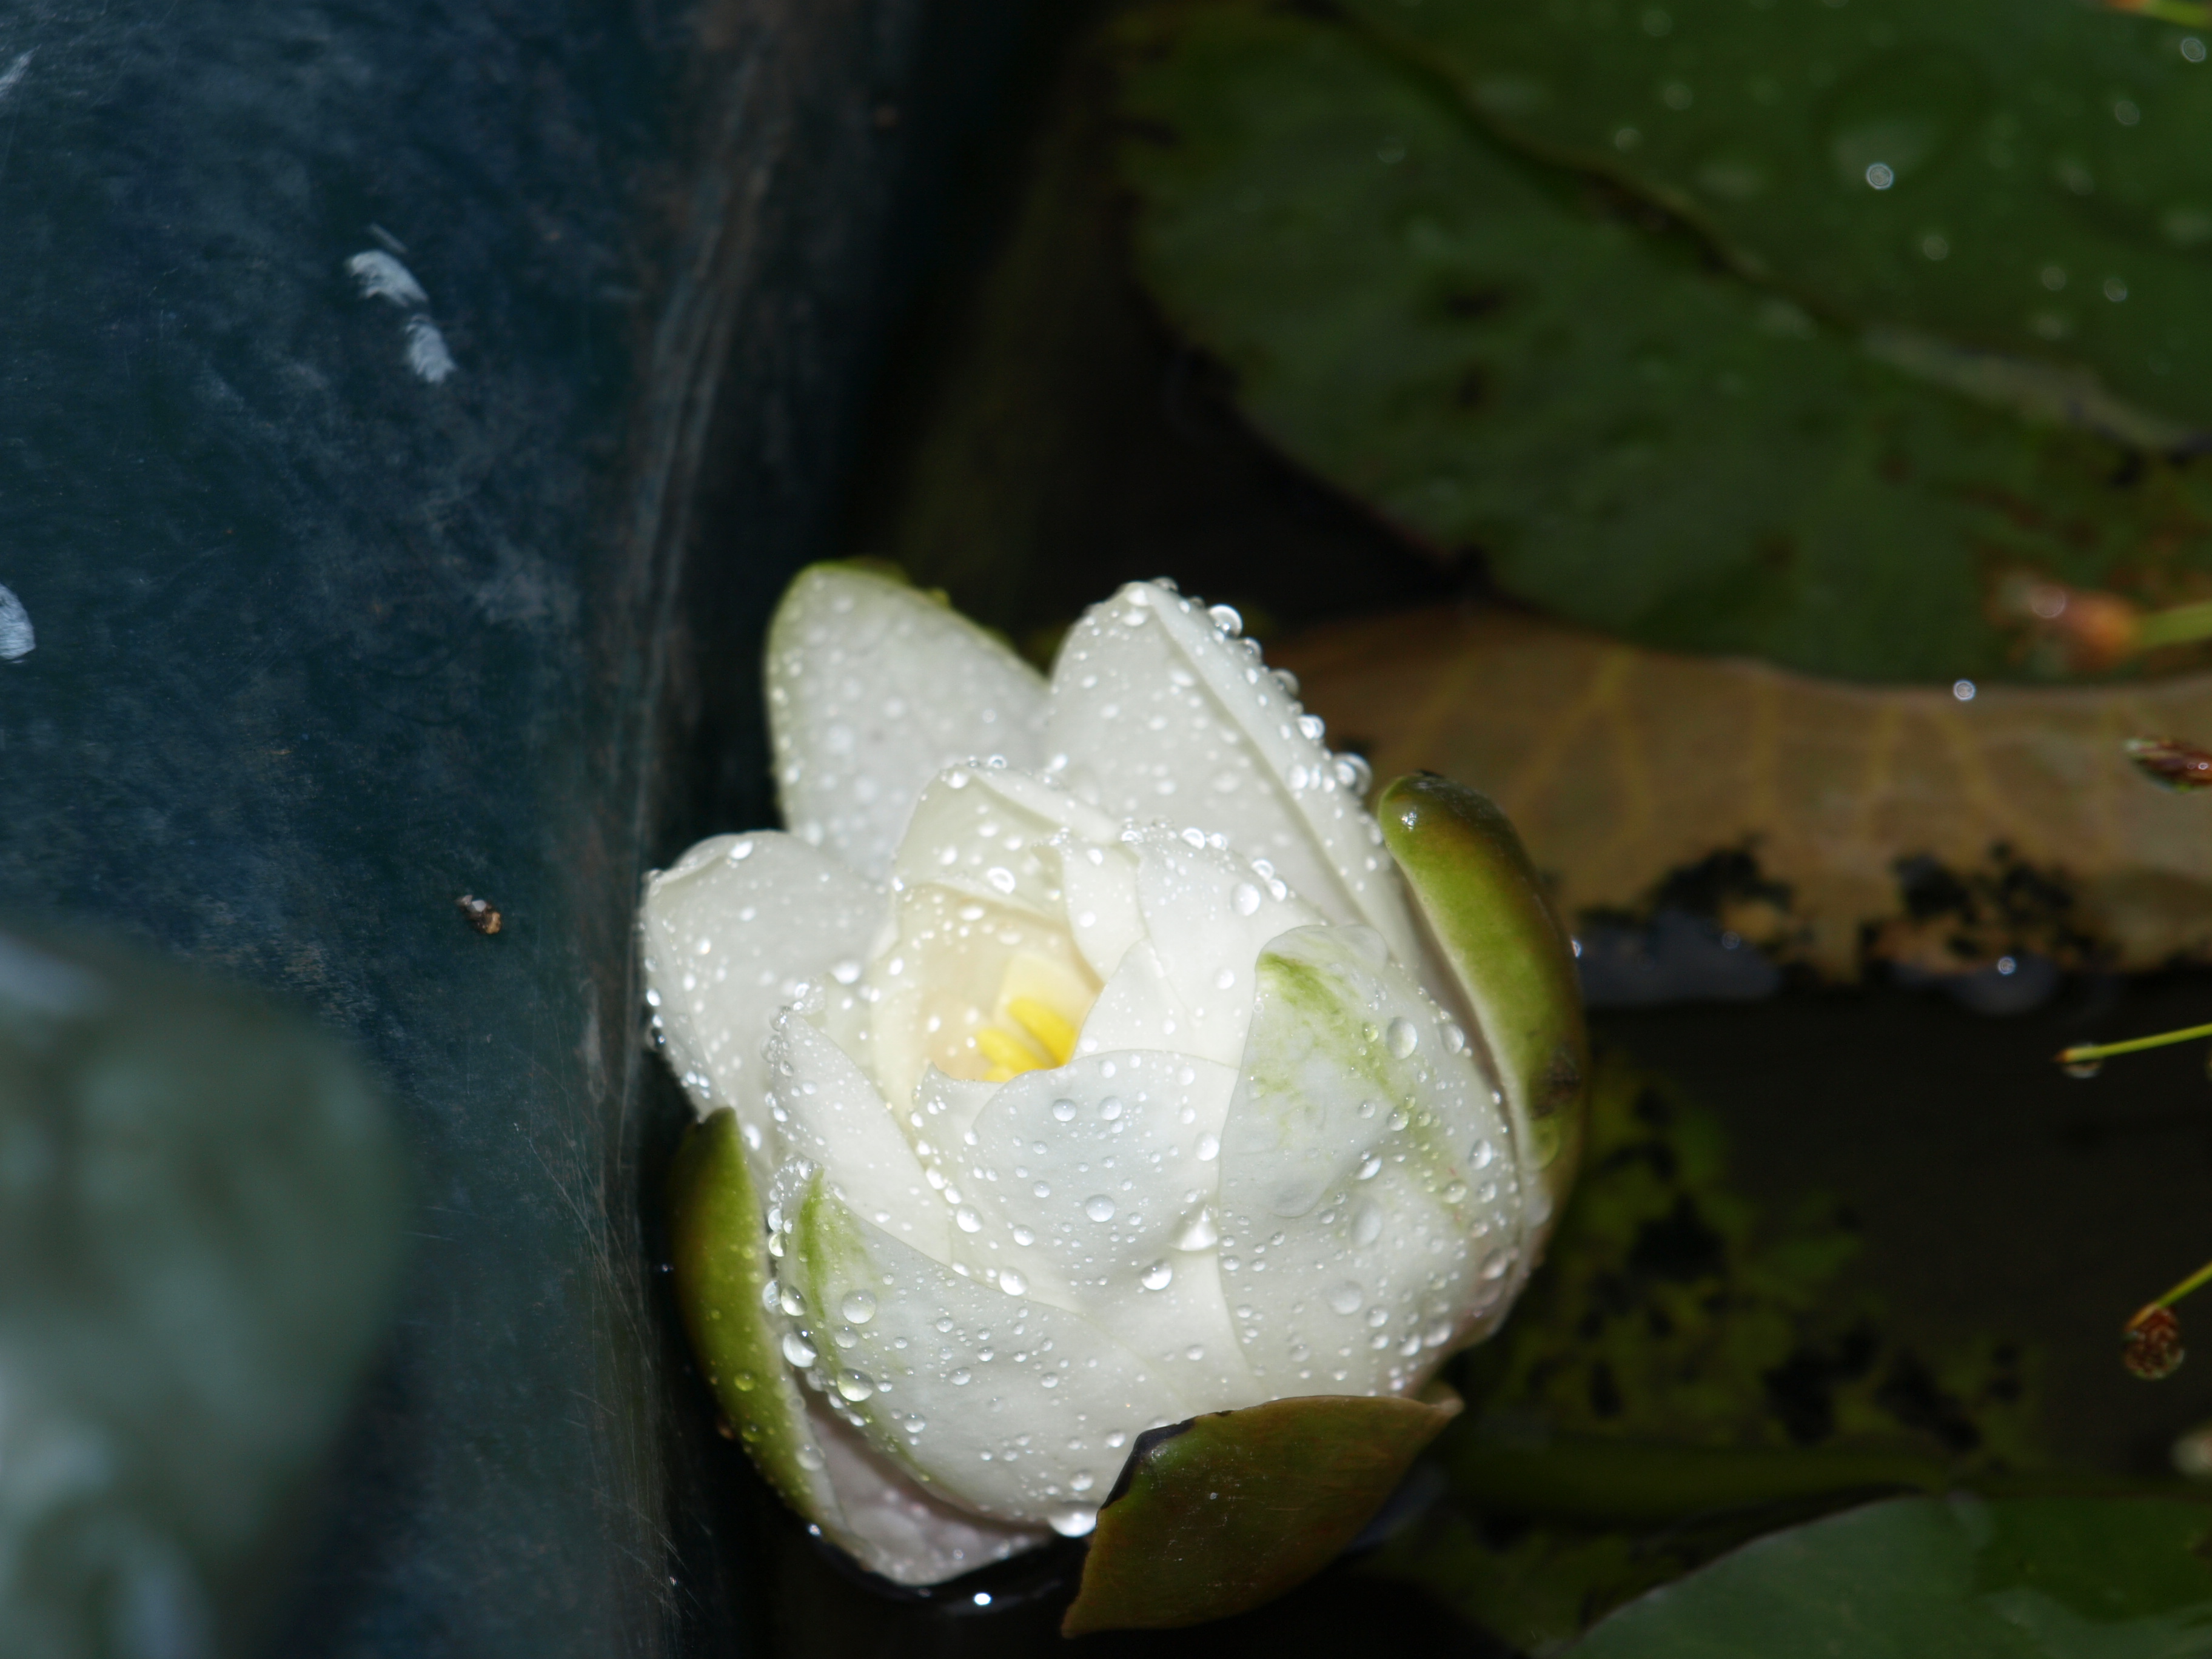 Water Lily just opening